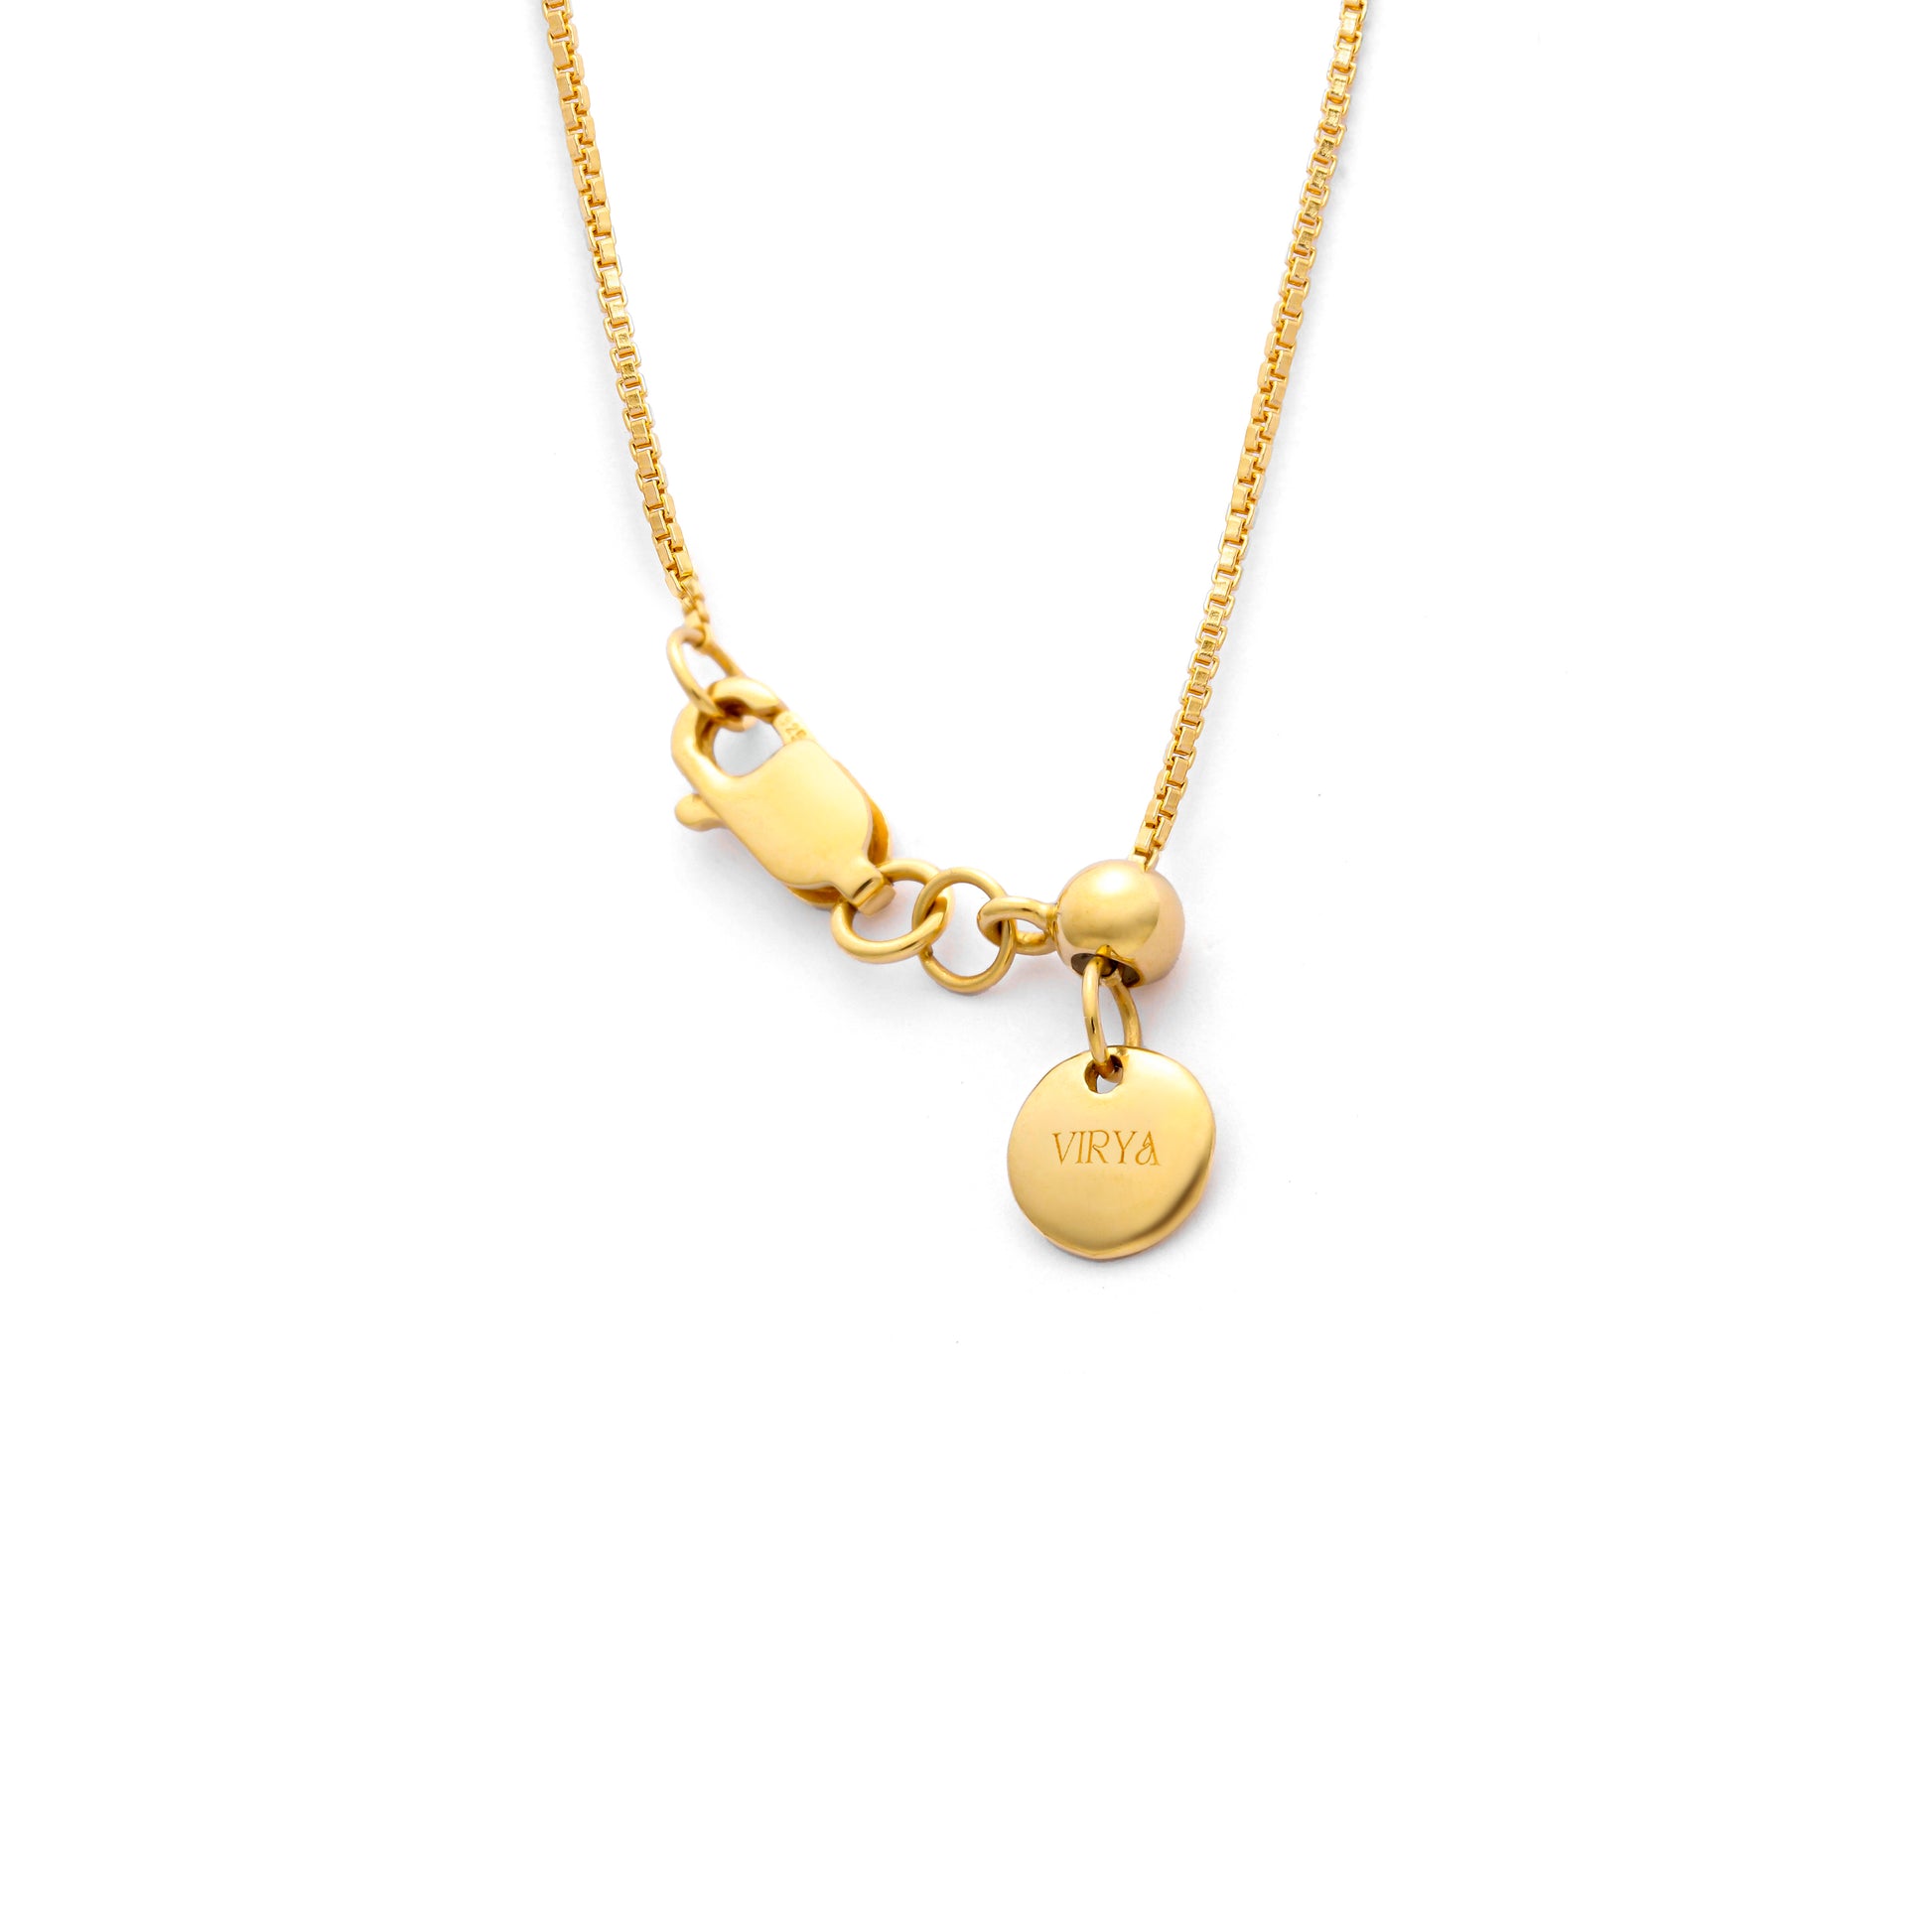 18k gold vermeil necklace clasp with a slider bead to adjust chain size with a round Virya logo tag